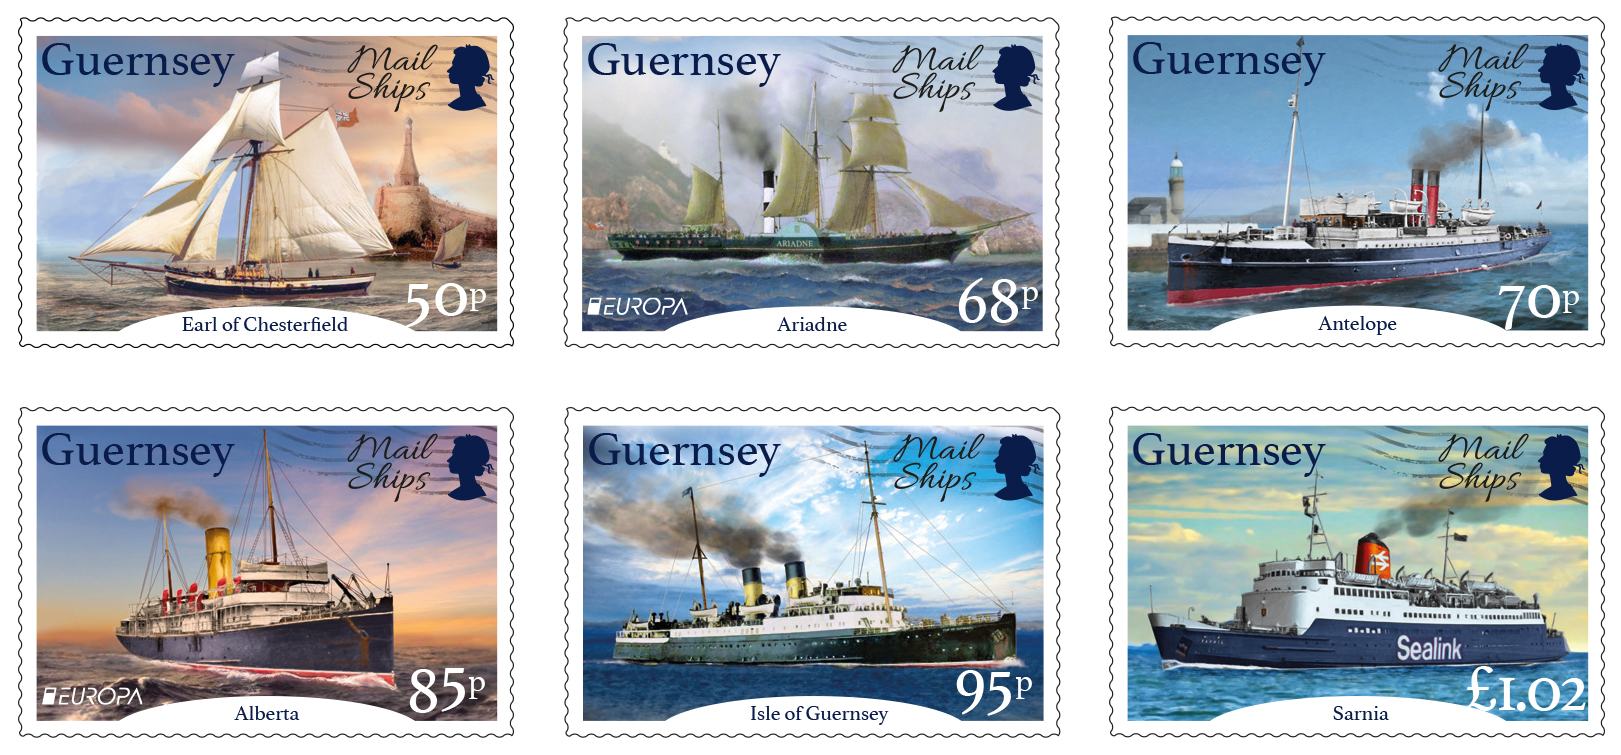 Guernsey Post to issue EUROPA stamps depicting Mail and Packet Ships